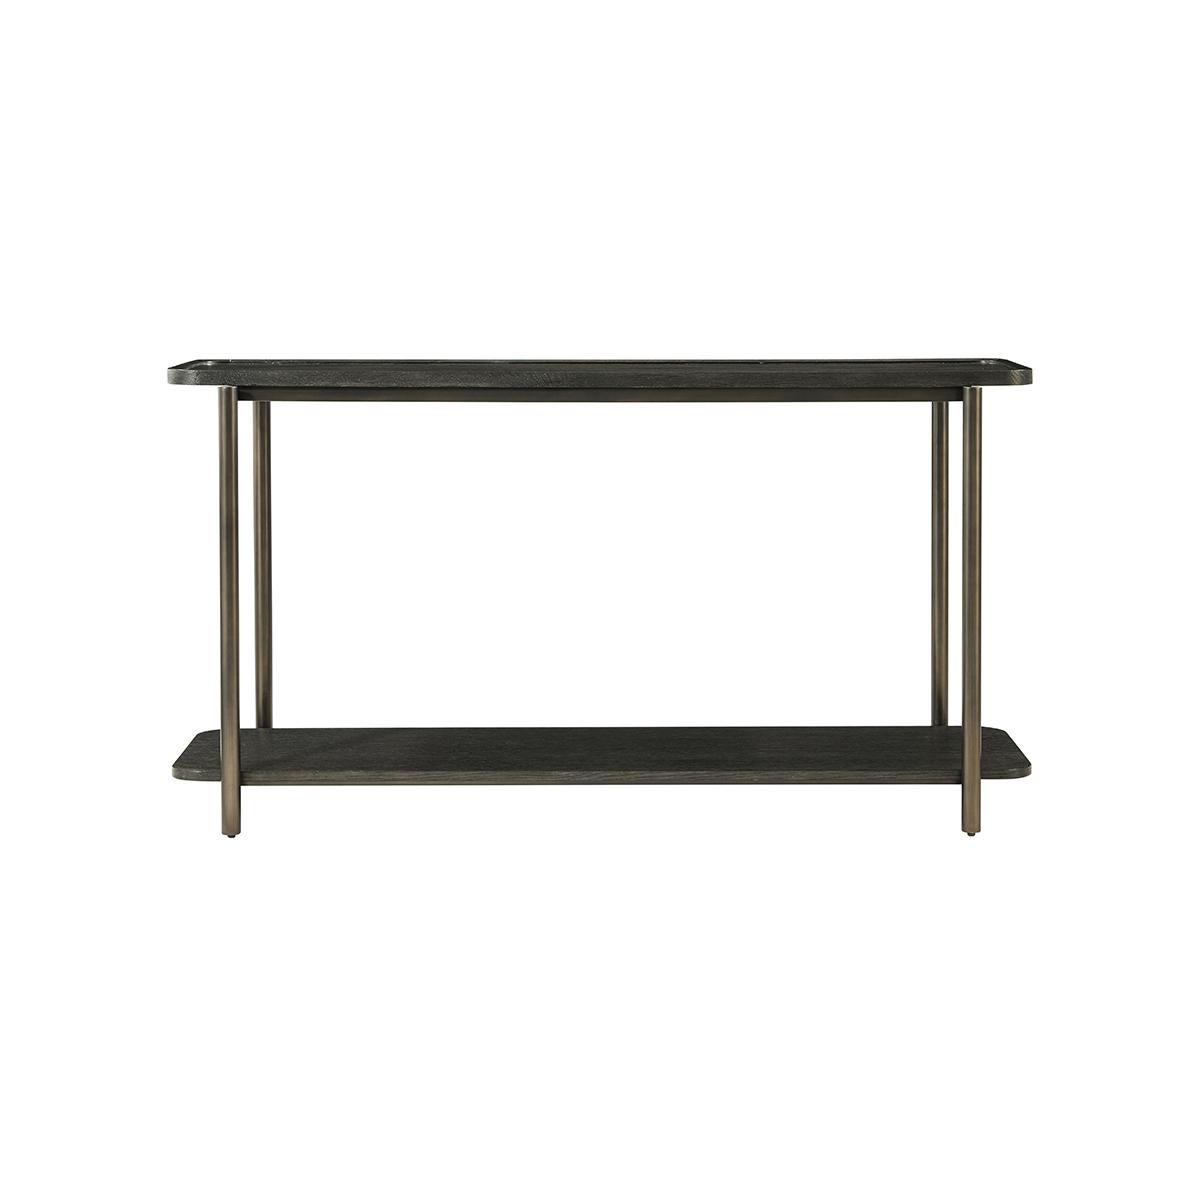 With a long sleek dishtop shelf supported by a tube form iron frame with a lower shelf stretcher base. Finished in a dark charcoal gray oak.

Dimensions: 60